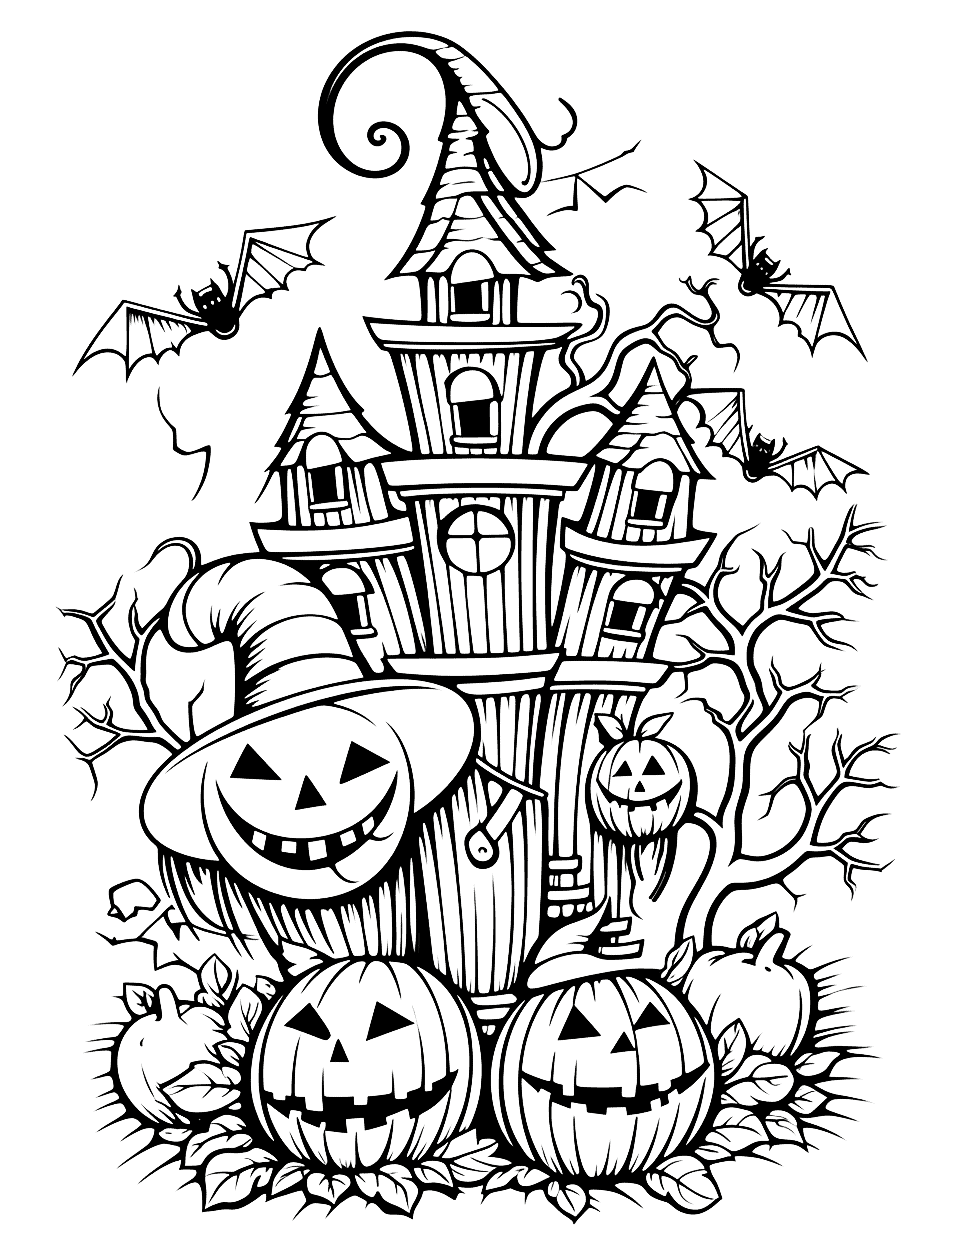 Spooky Castle Halloween Coloring Page - A castle filled with Halloween-themed pumpkin characters and bats.